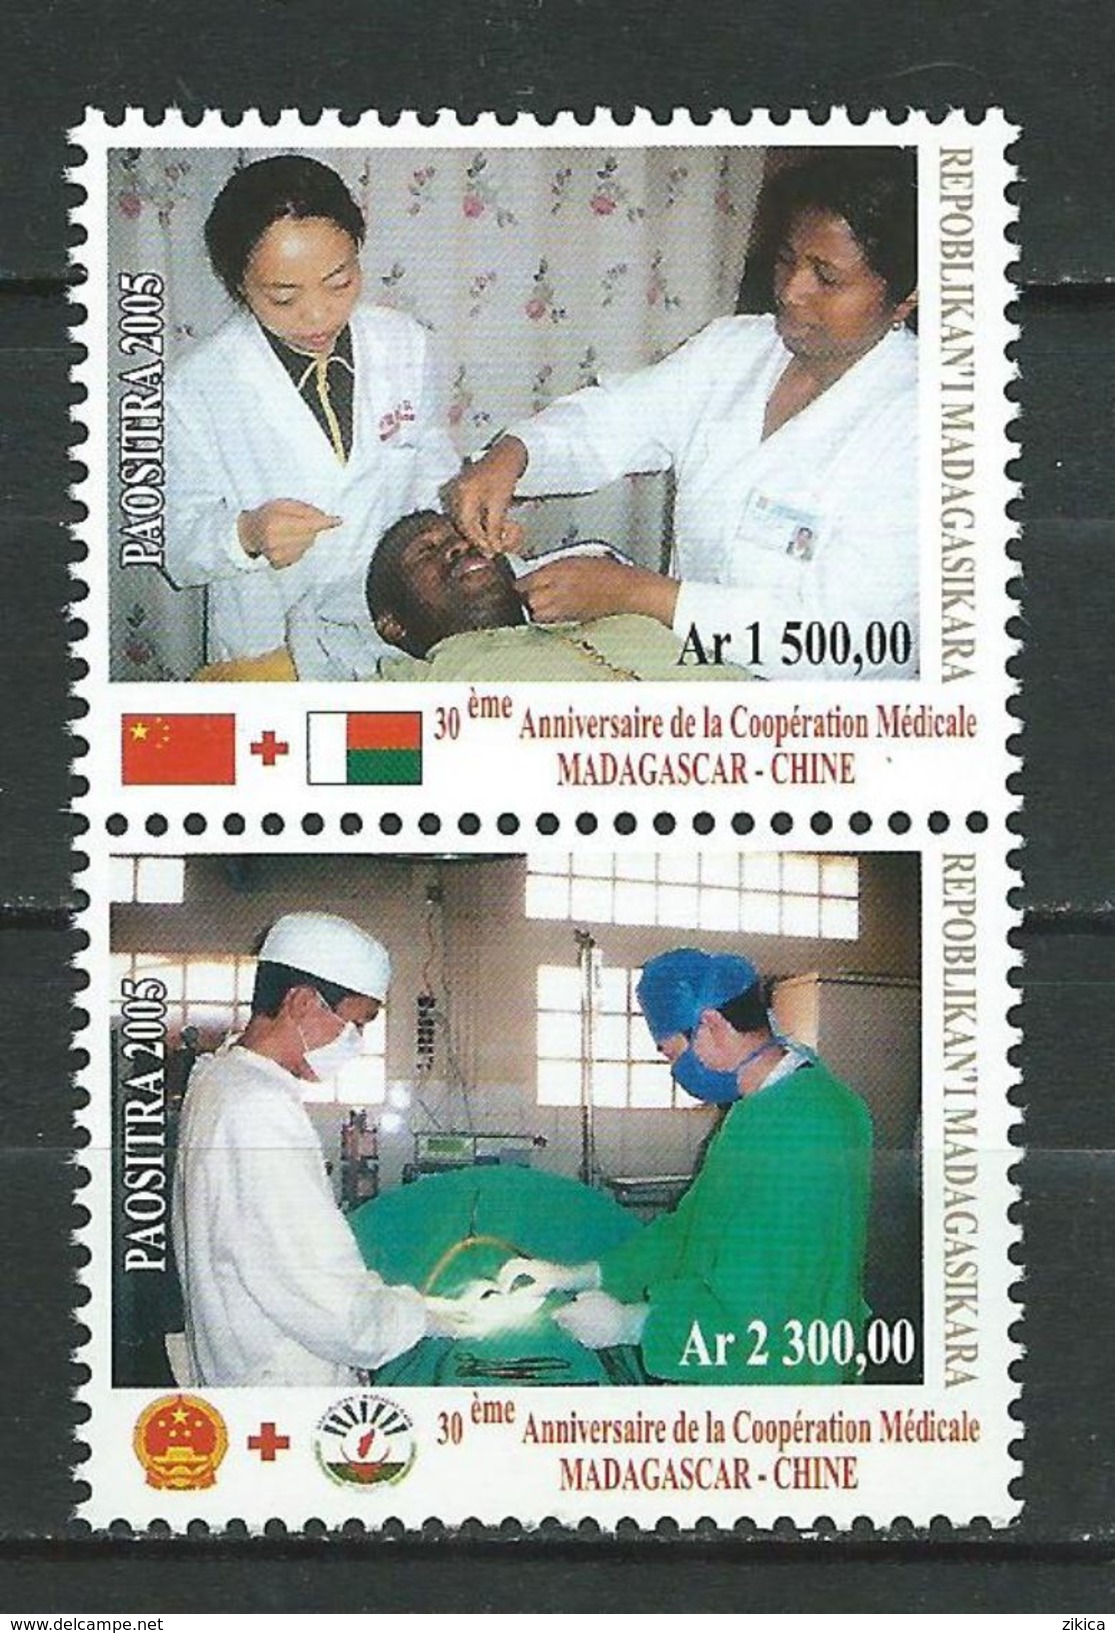 Madagascar 2005 The 30th Ann. Of Cooperation Of Madagascar And China For Health Service. Red Cross. Medicine. MNH - Madagascar (1960-...)